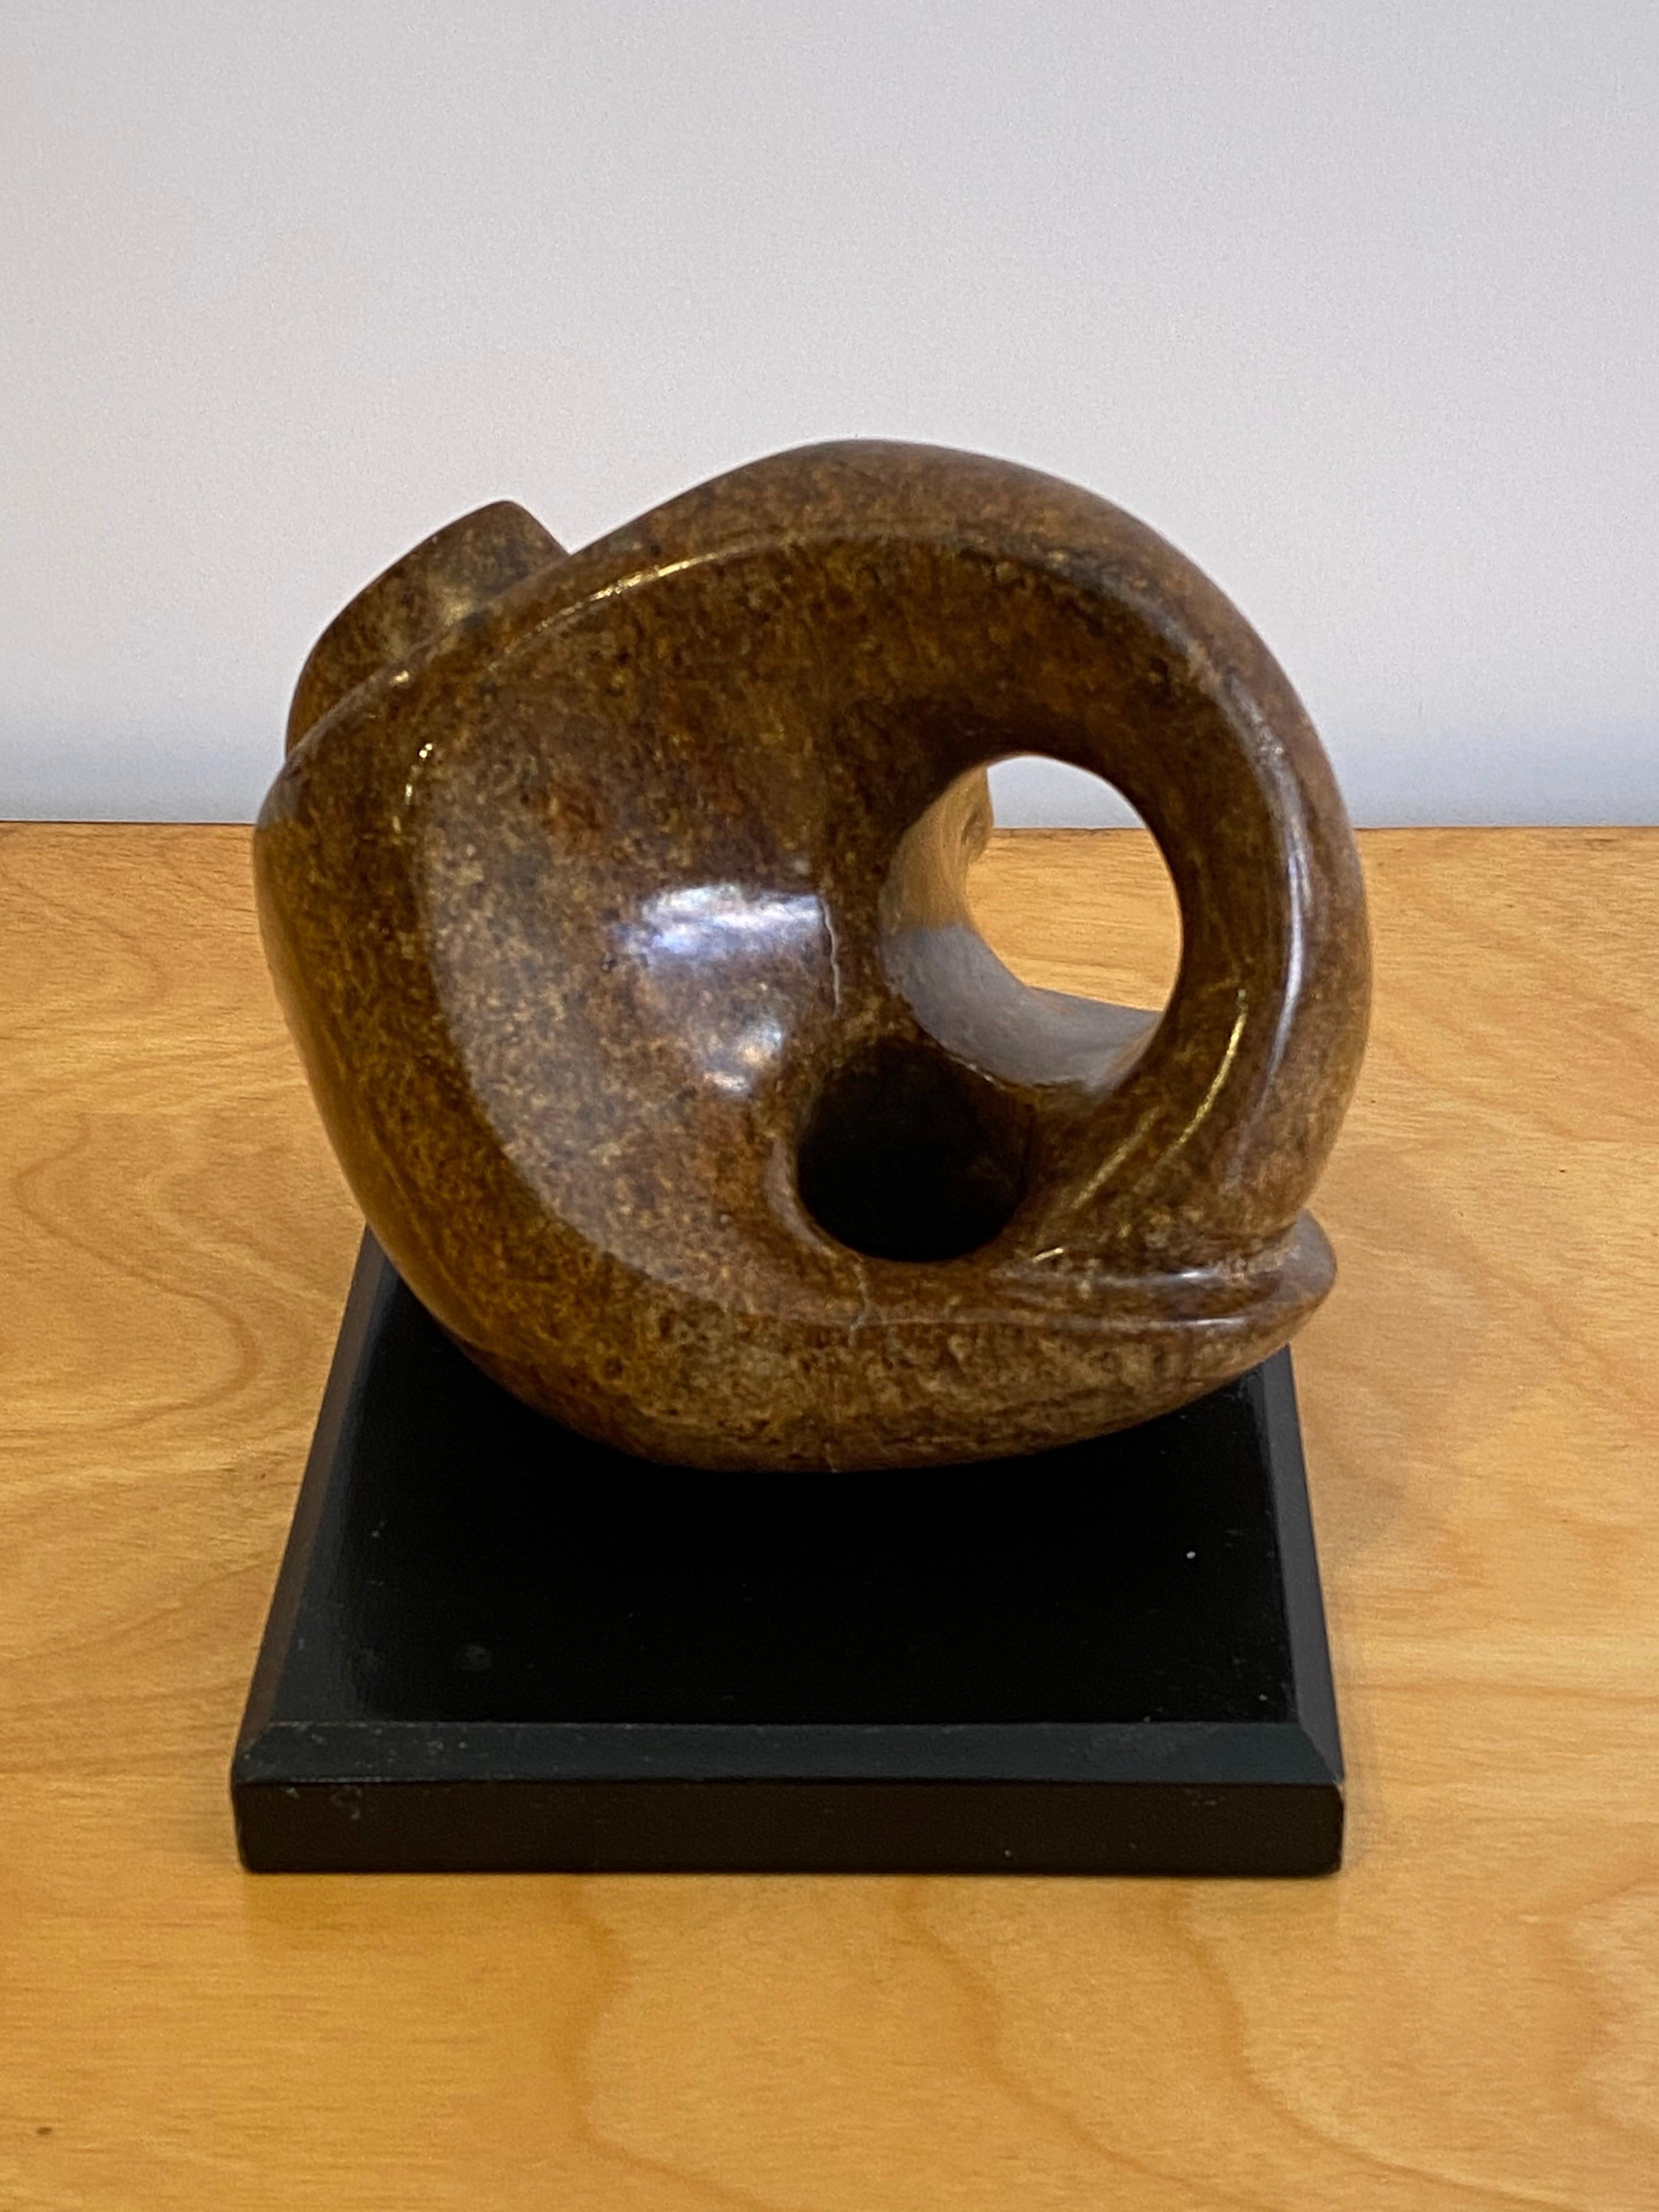 Brown marble carved and polished abstract sculpture on a wood base. Unsigned, very nice quality!